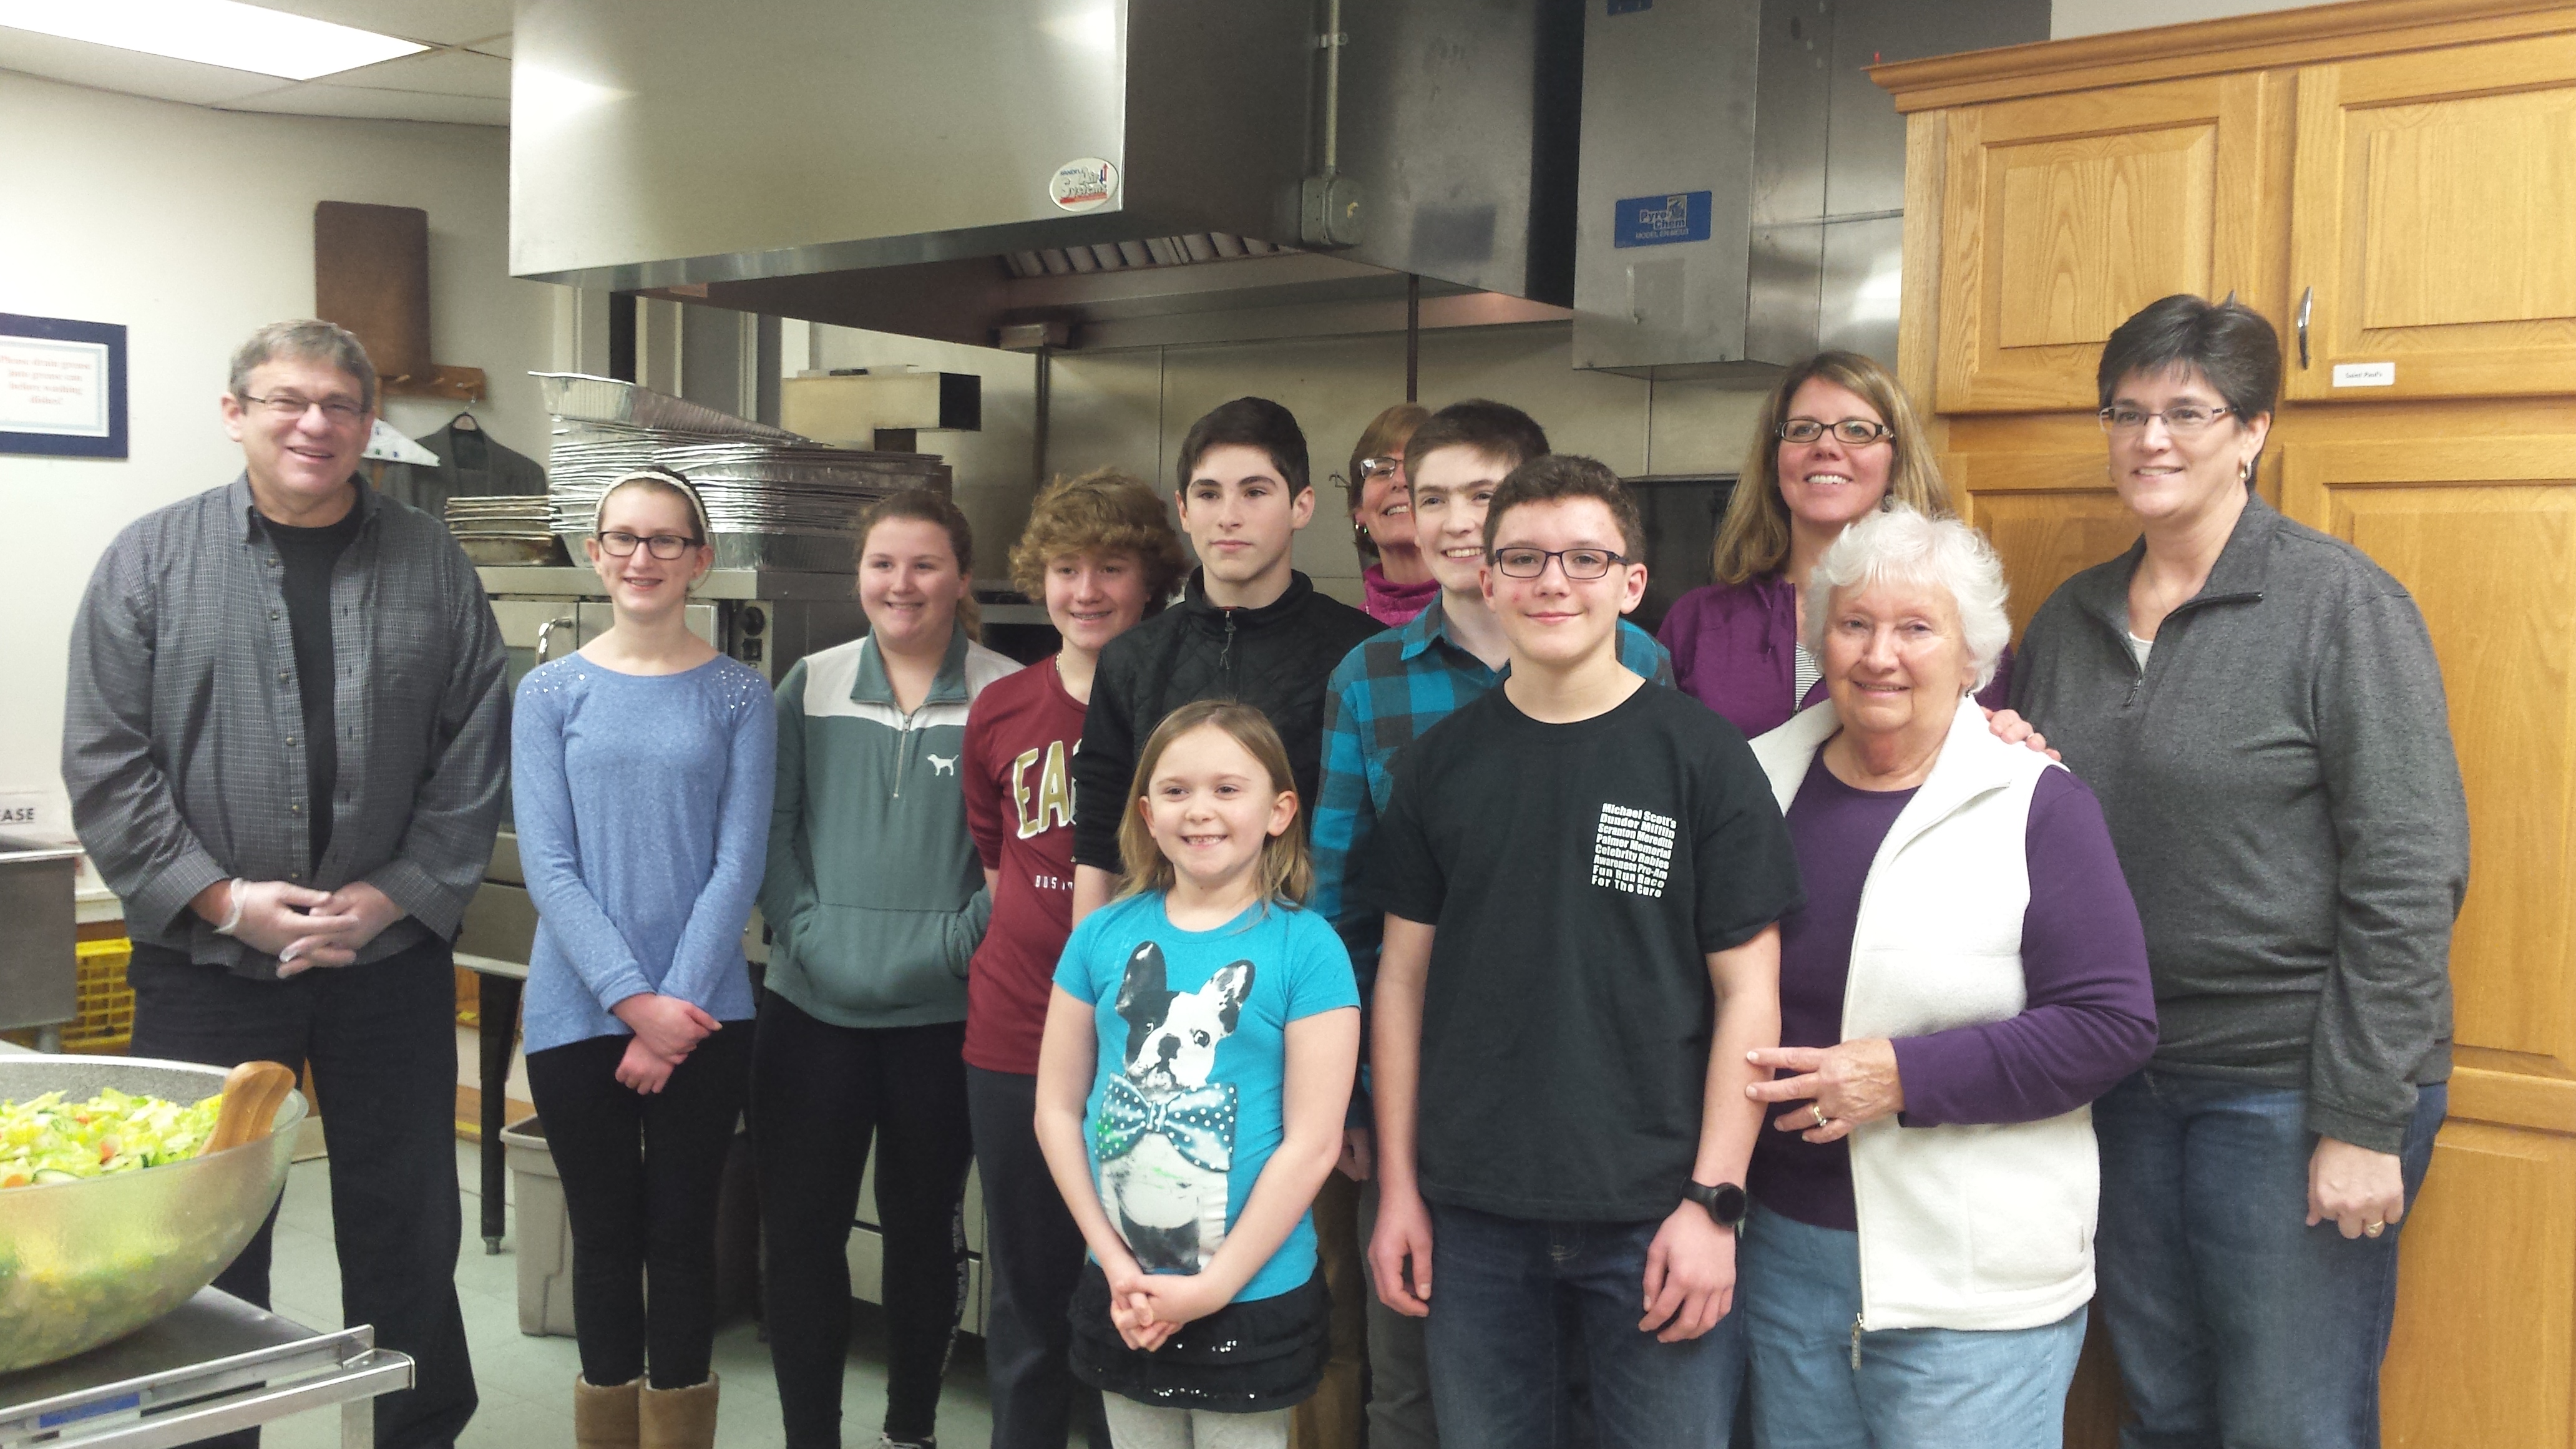 Our Middle Schoolers at St. Paul’s Soup Kitchen